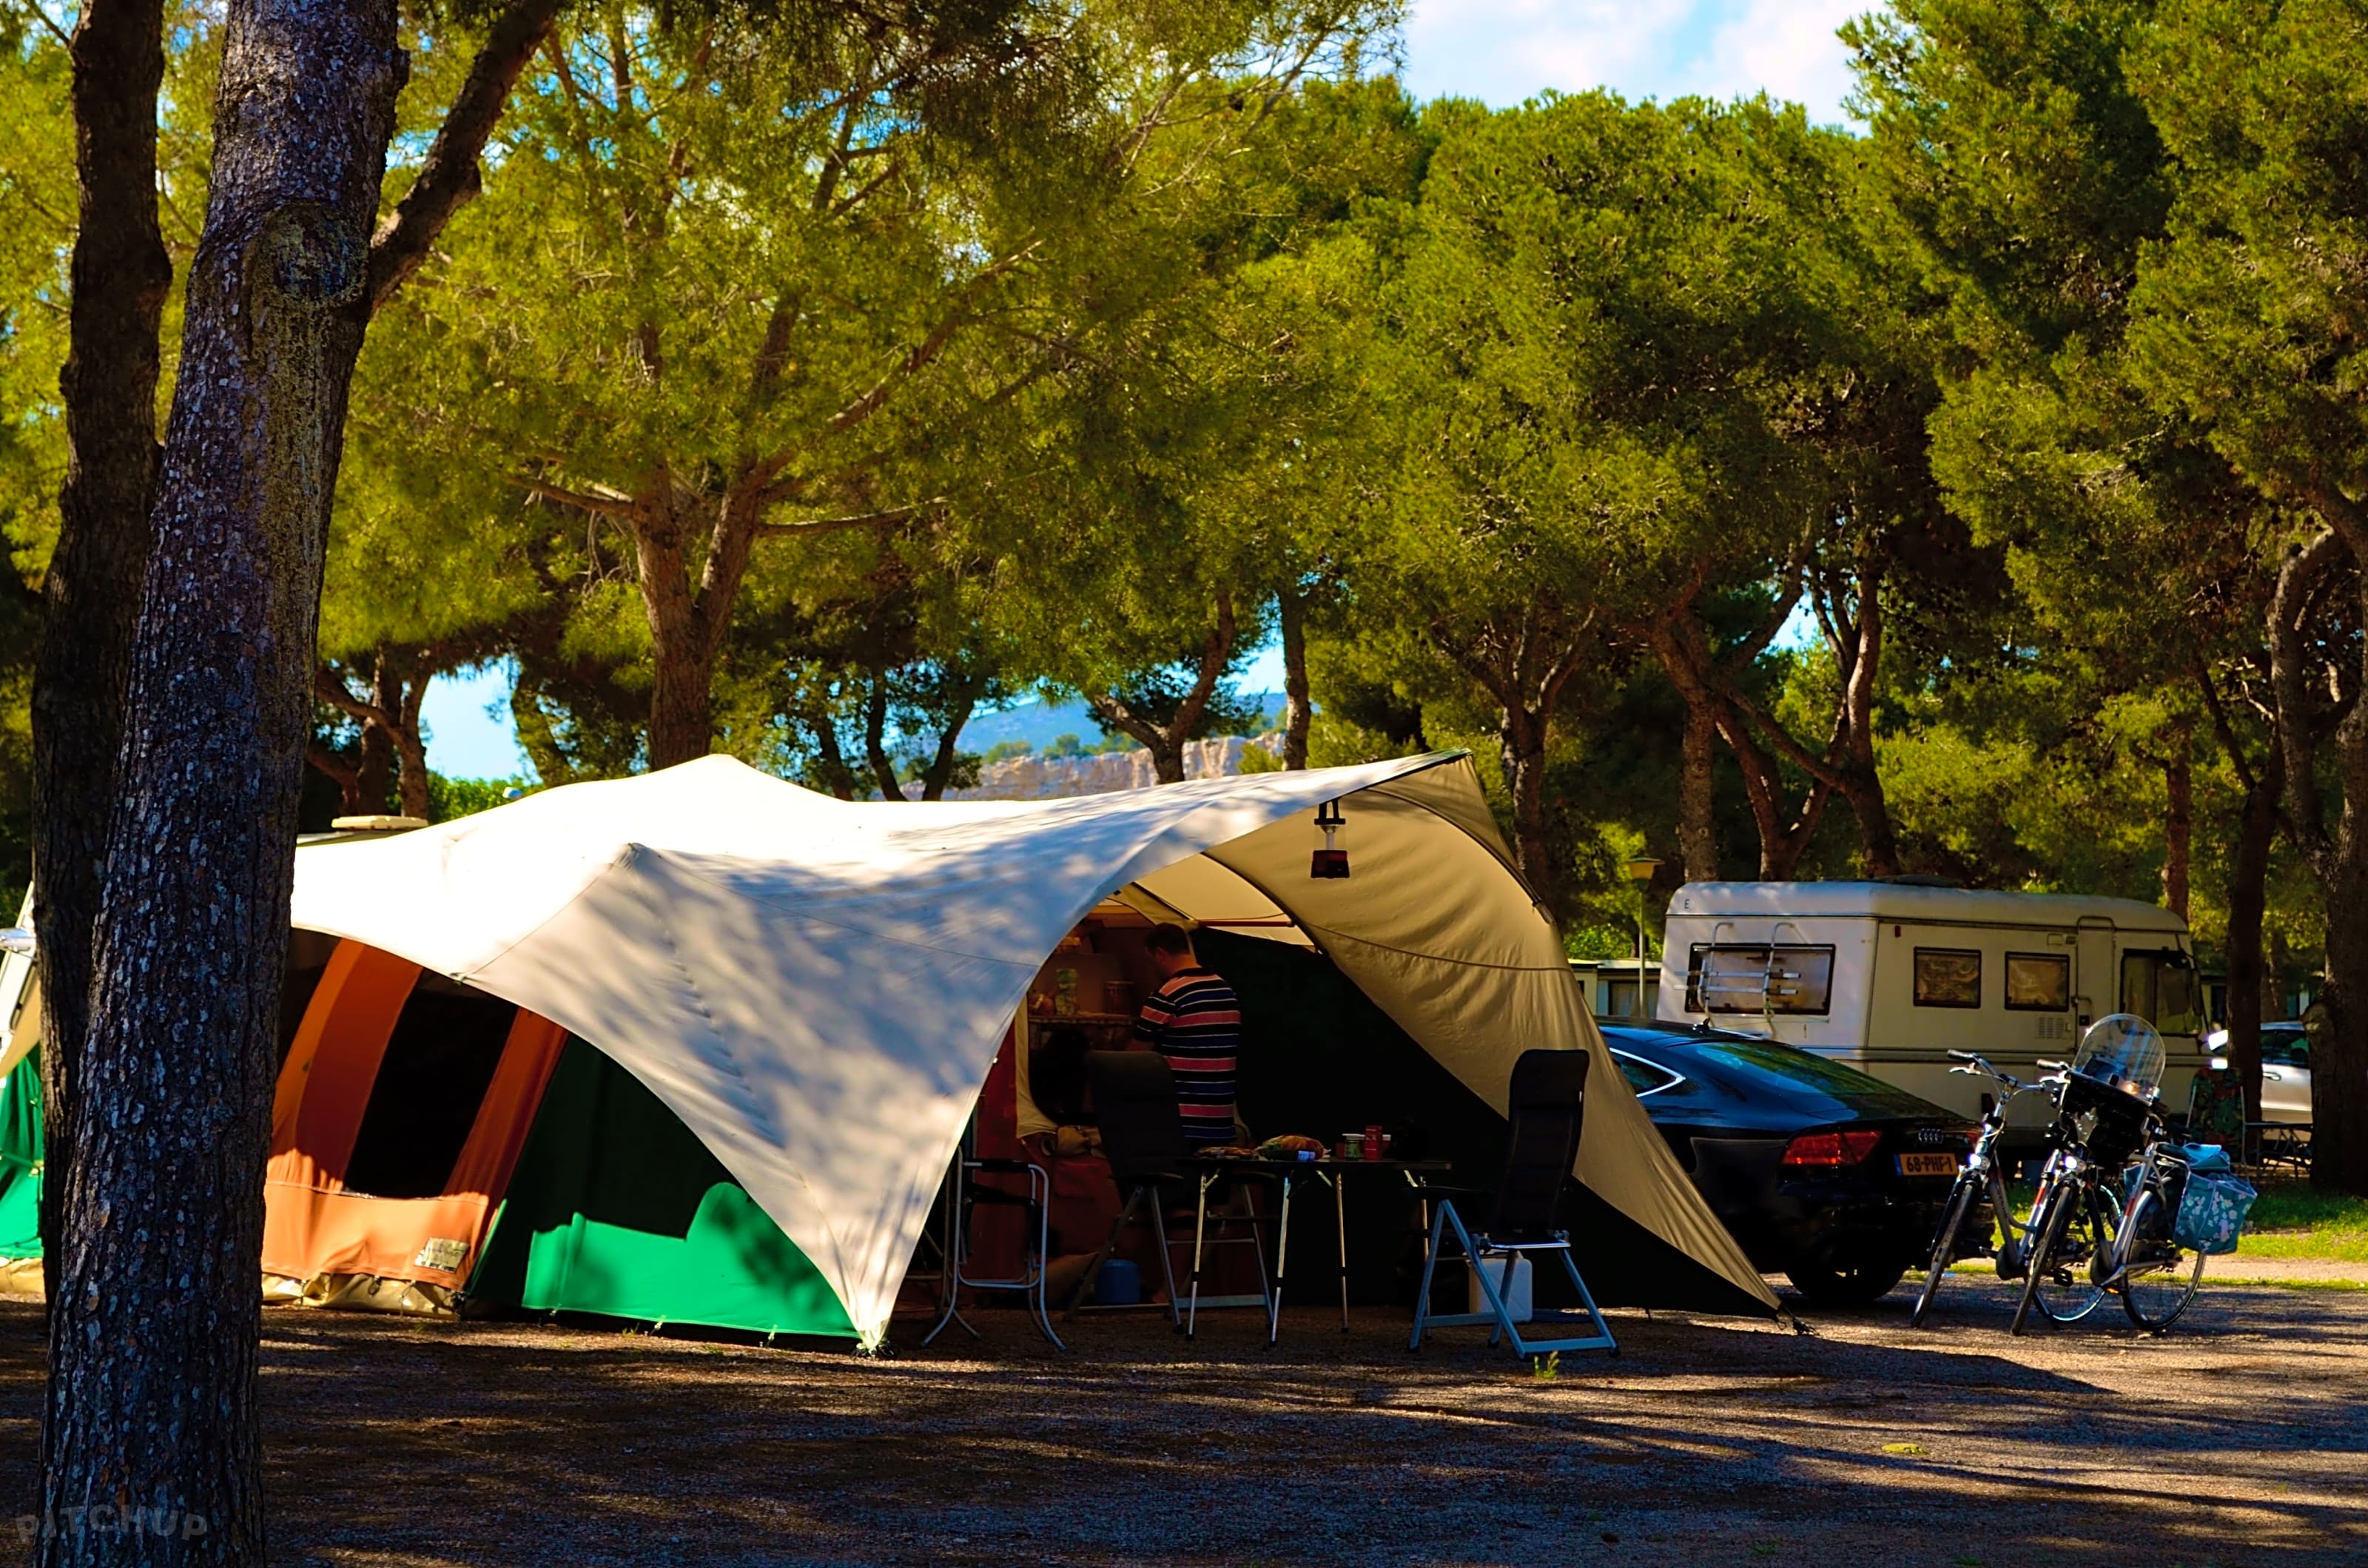 Camping El Garrofer, Sitges - Updated 2020 prices - Pitchup®